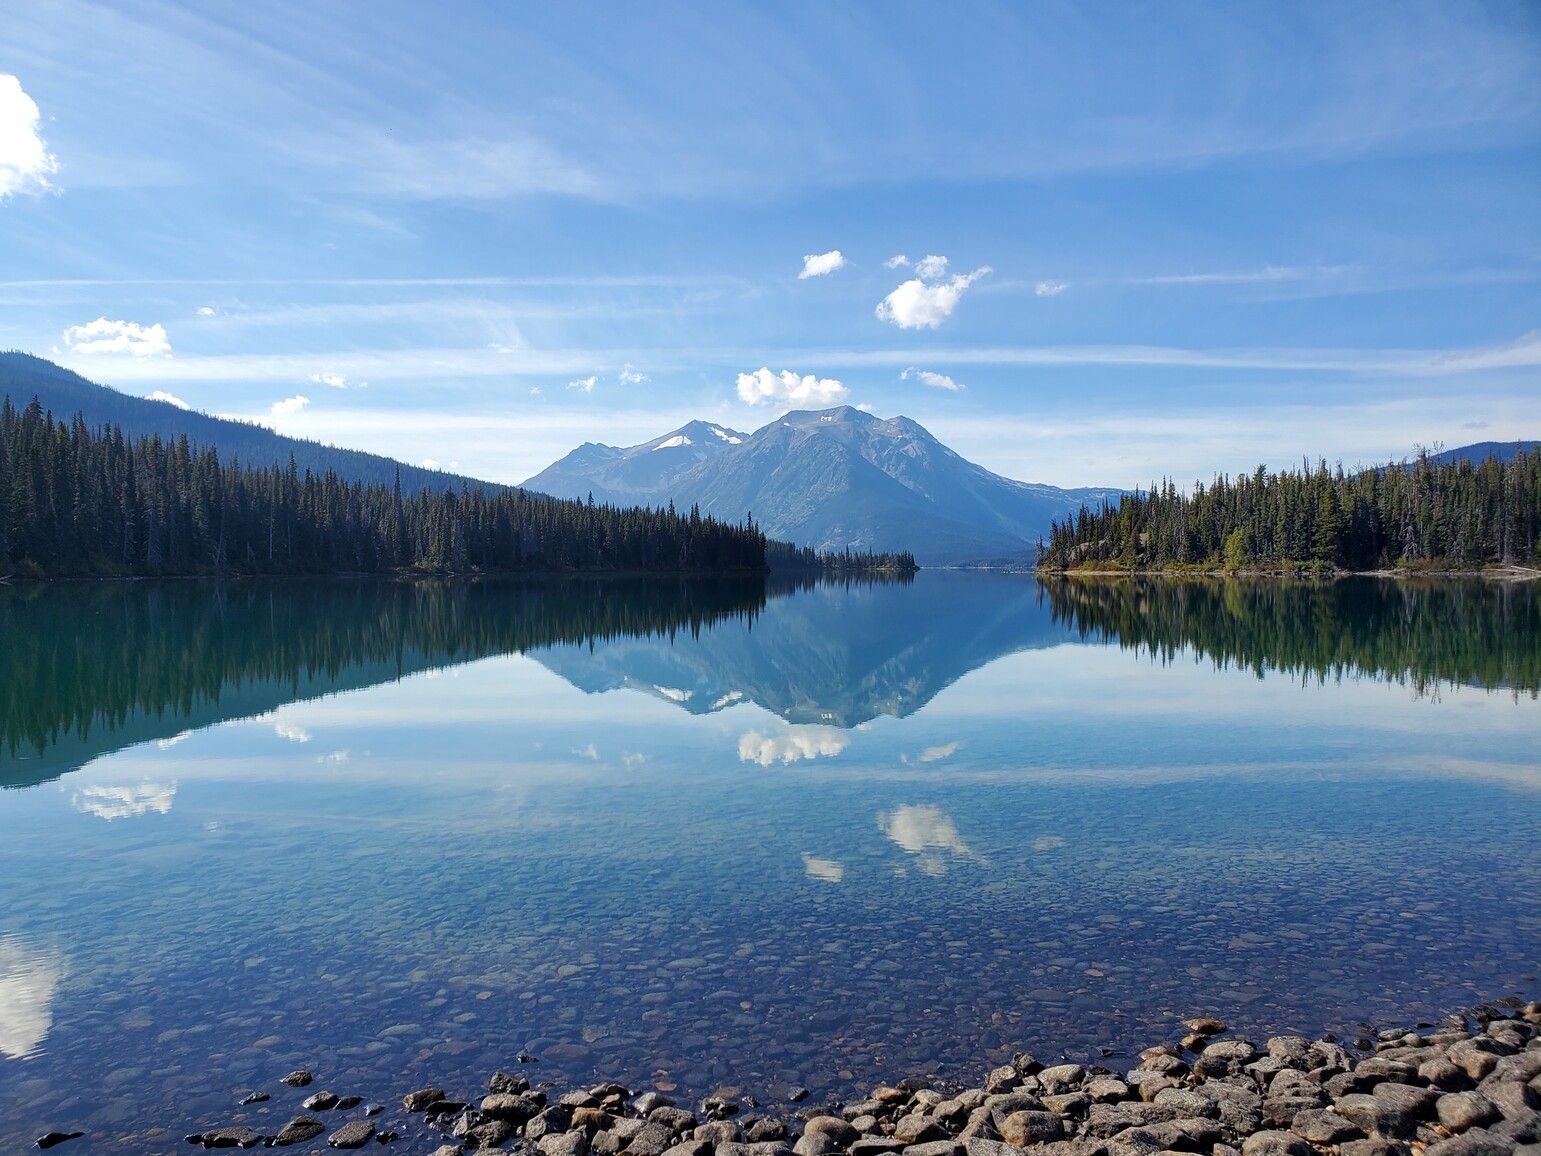 Pondosy Lake with Gable Mountain reflecting on the surface of the clear water. Tweedsmuir Park North.